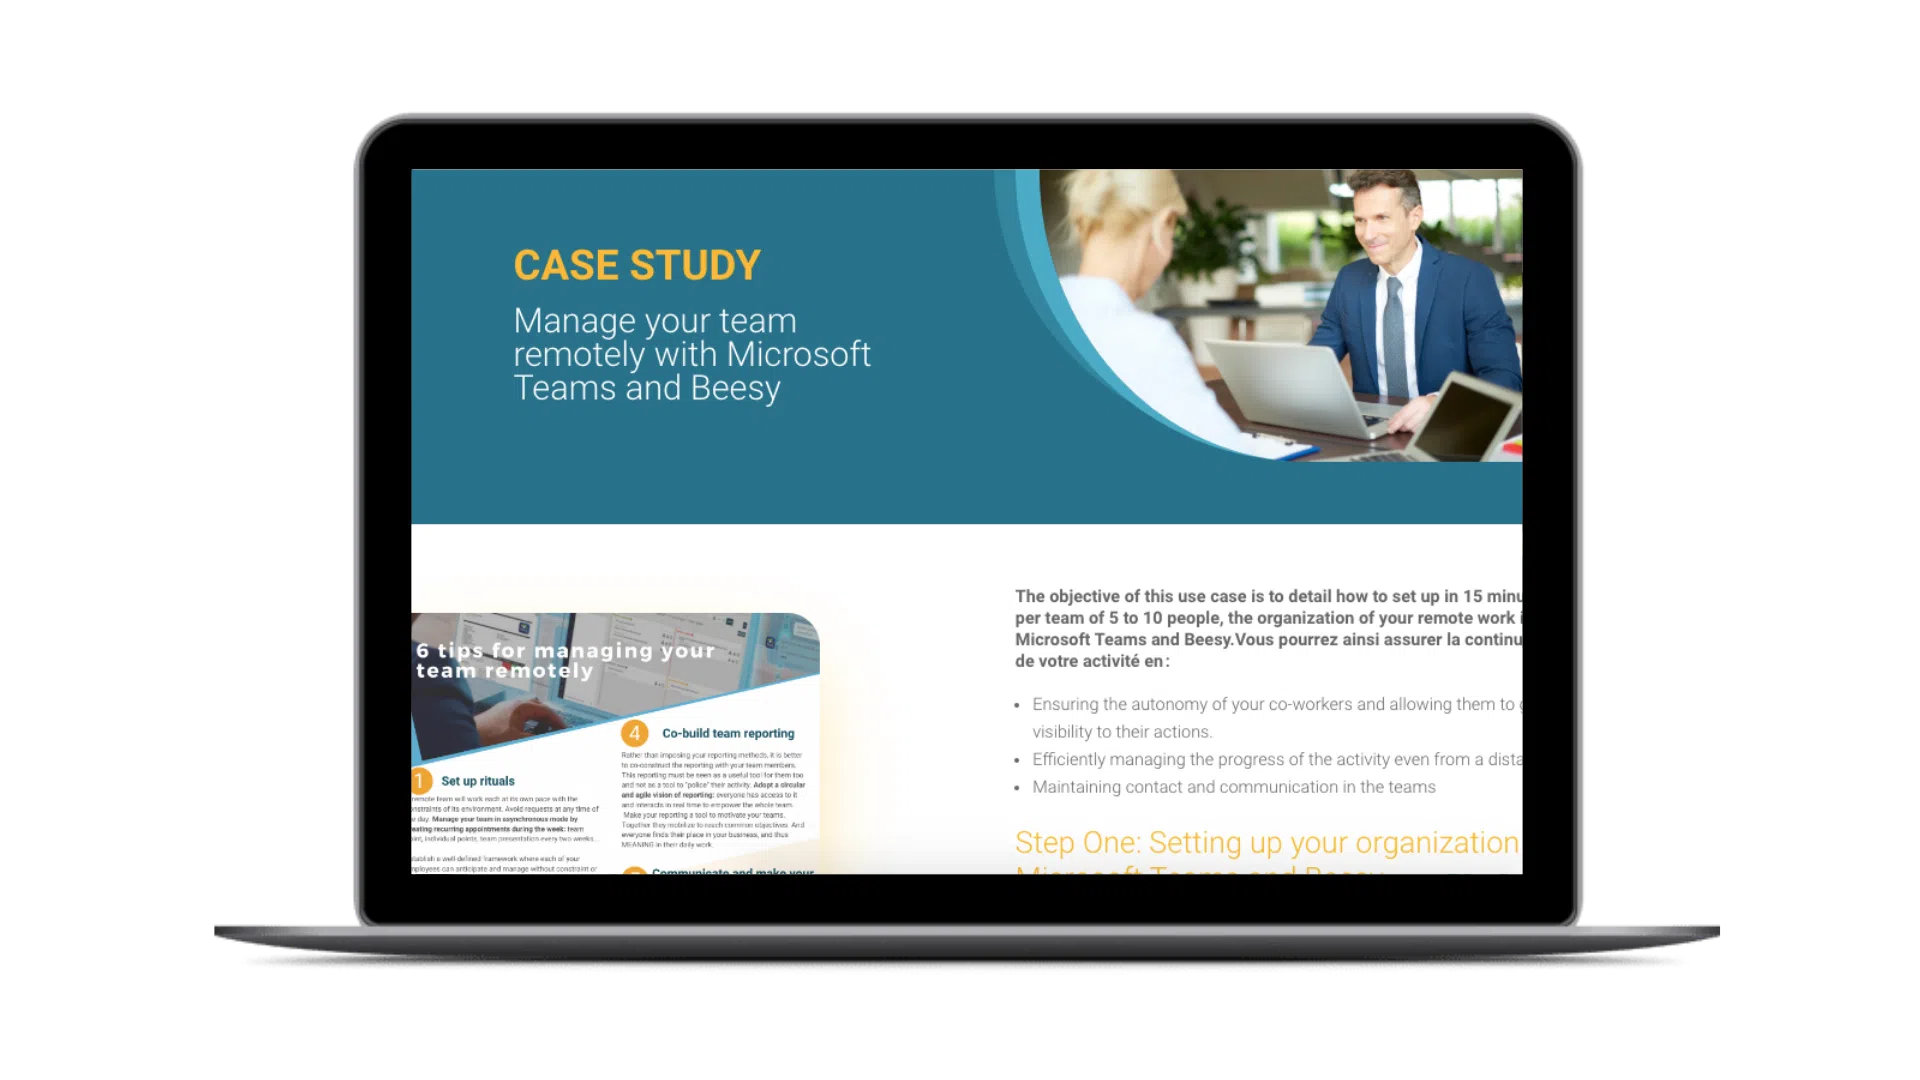 CASE STUDY Manage your team remotely with Microsoft Teams and Beesy